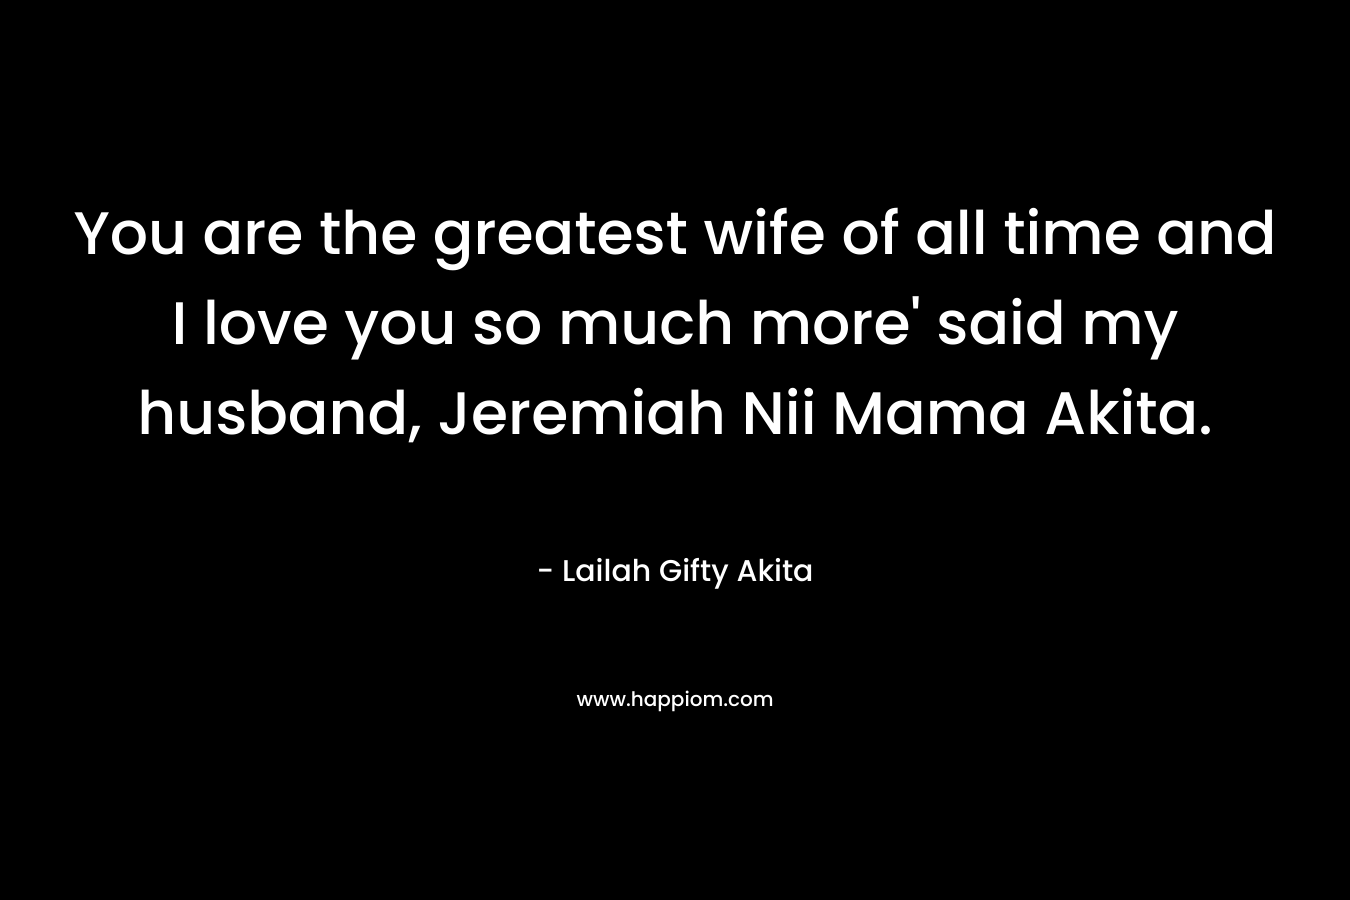 You are the greatest wife of all time and I love you so much more’ said my husband, Jeremiah Nii Mama Akita. – Lailah Gifty Akita